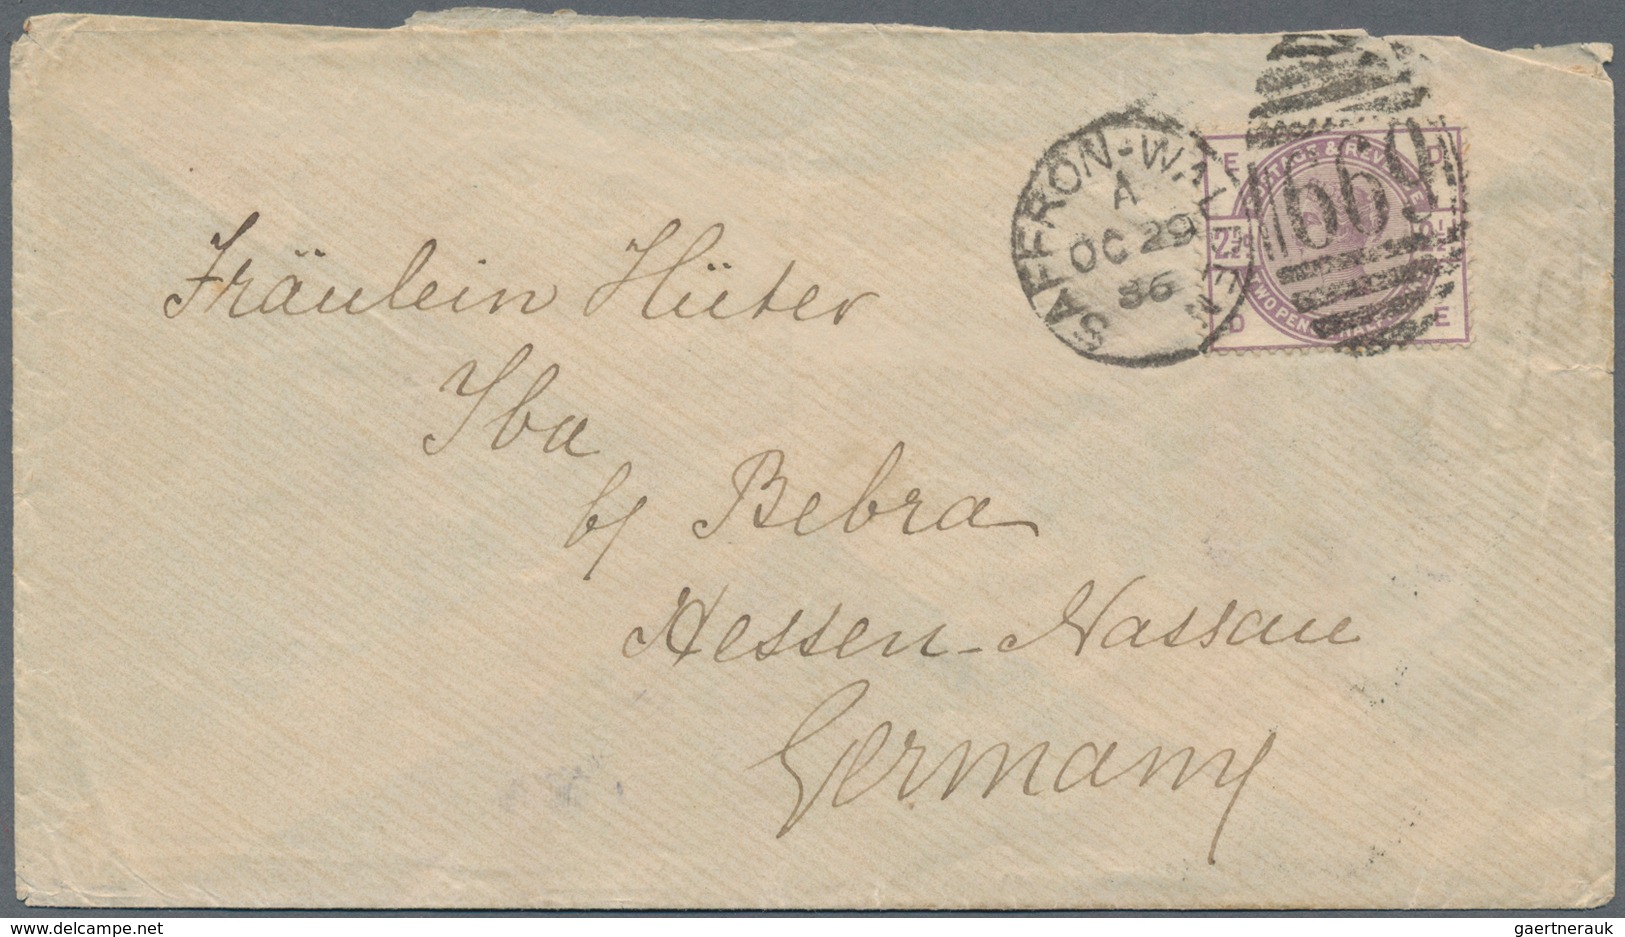 Großbritannien: 1843-1950, 26 covers, many bearing classic issues starting imperf QV, mail to India